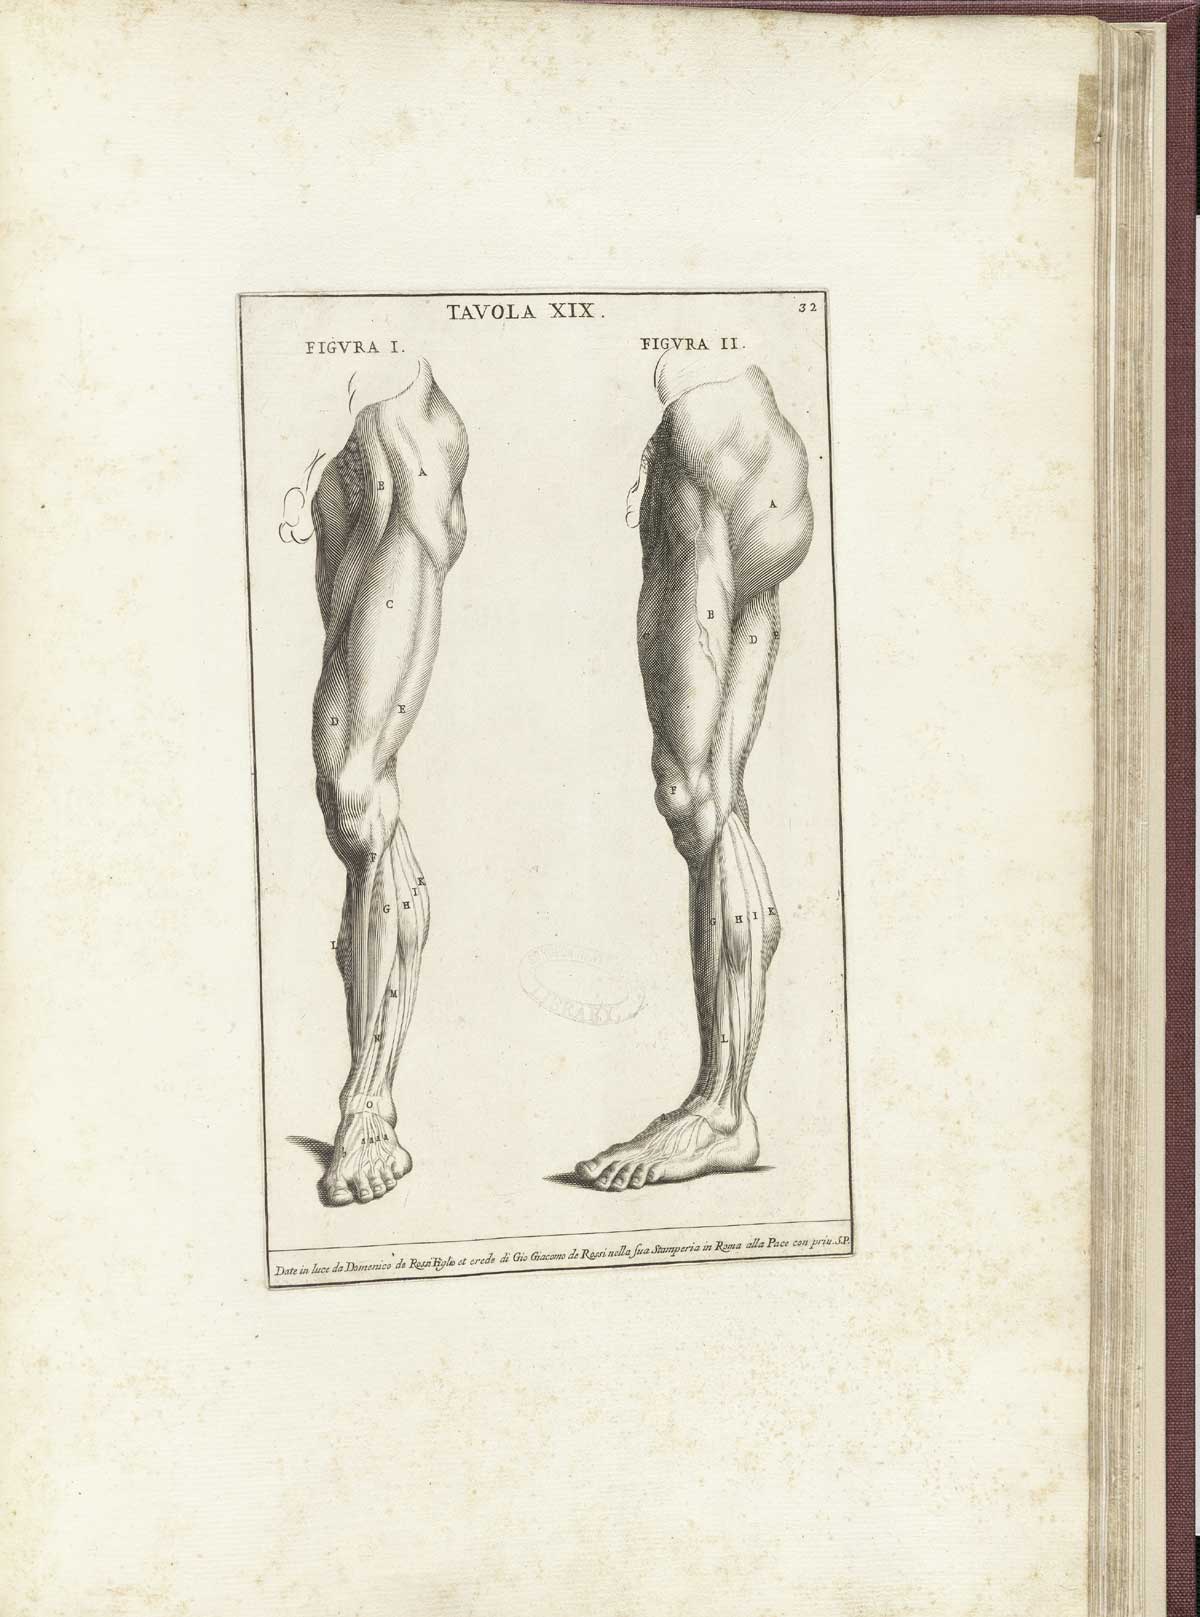 Engraving of a standing, facing muscle figure with right arm raised with flesh removed to show detail of the muscles of the entire front of the body including arms, legs, chest, and abdomen; from Bernardino Genga’s Anatomia per uso et intelligenza del disegno, NLM Call no.: WZ 250 G329an 1691.